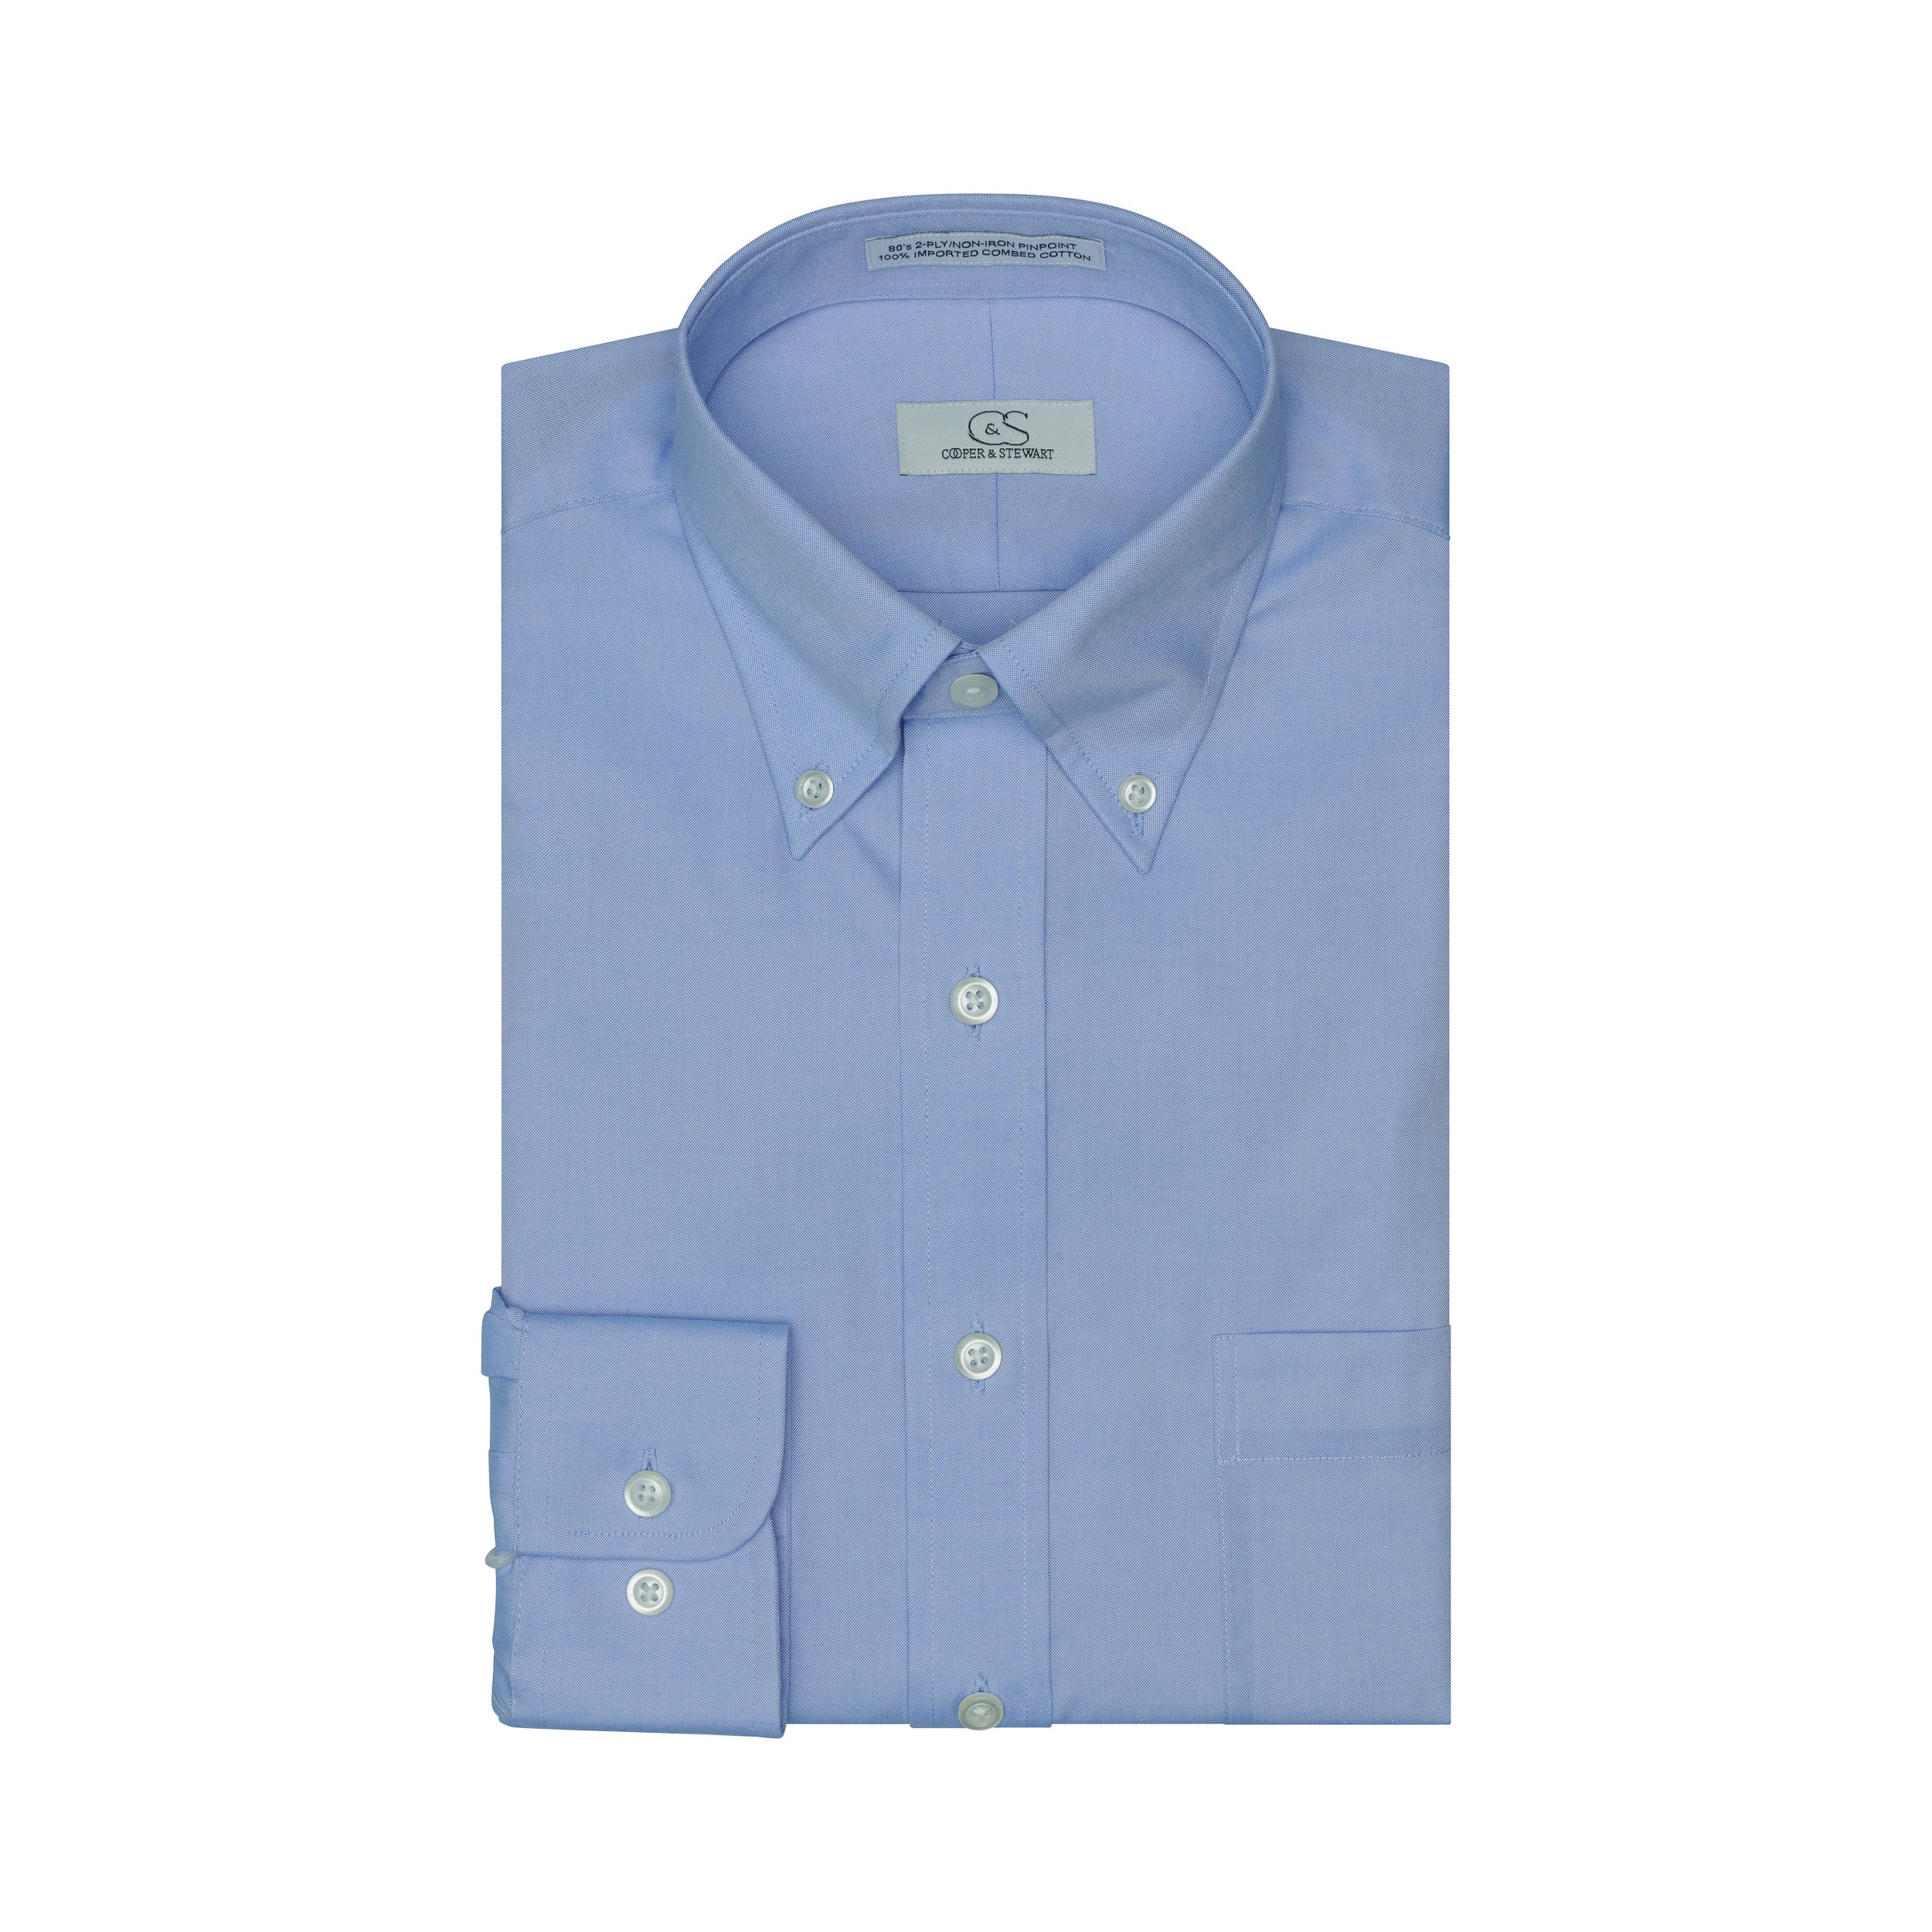 002 TF BD - Blue Tailored Fit Button Down Collar